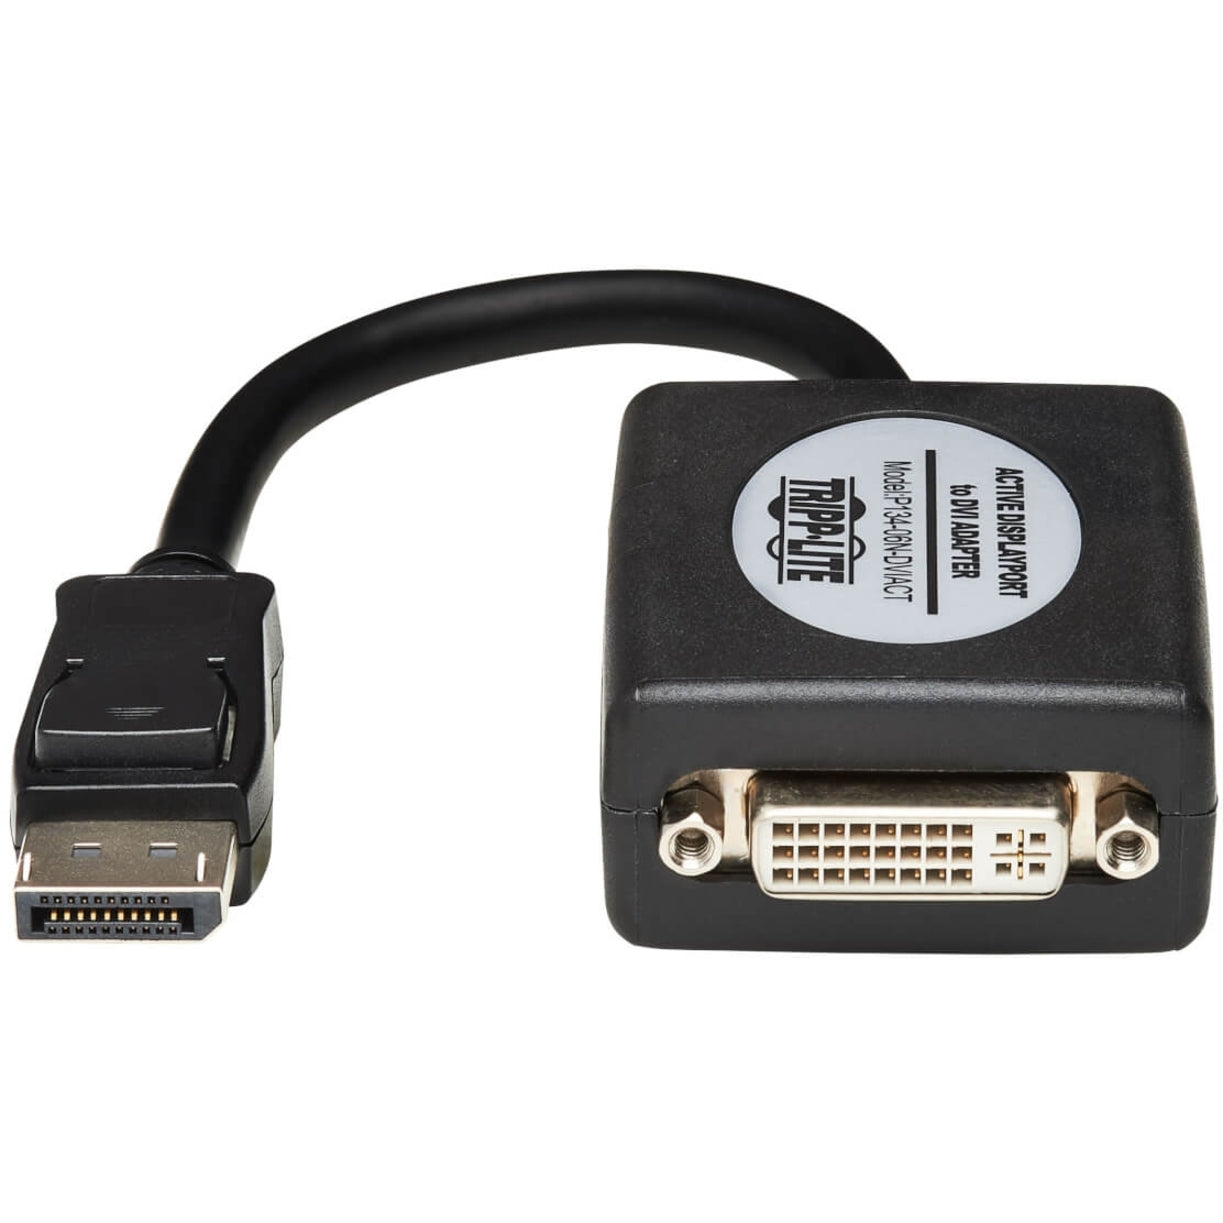 Tripp Lite P134-06N-DVIACT DisplayPort to DVI Active Converter, 1920x1200/1080P (M/F) 6-in, Video Cable